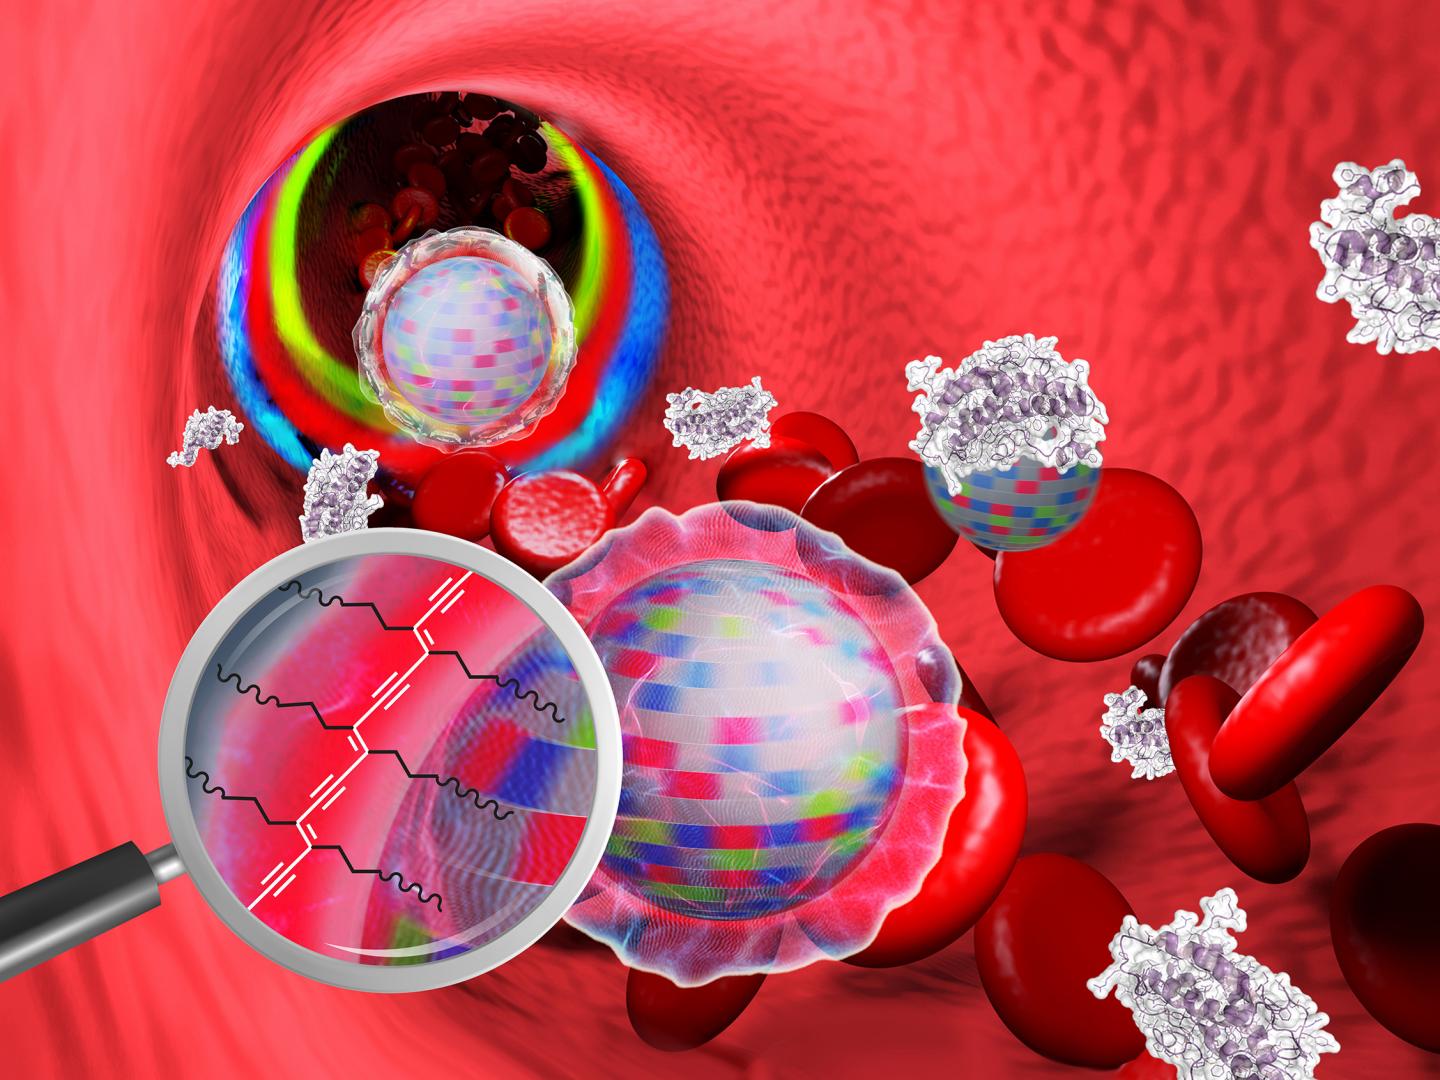 Coated Nanoparticles in the Blood Stream